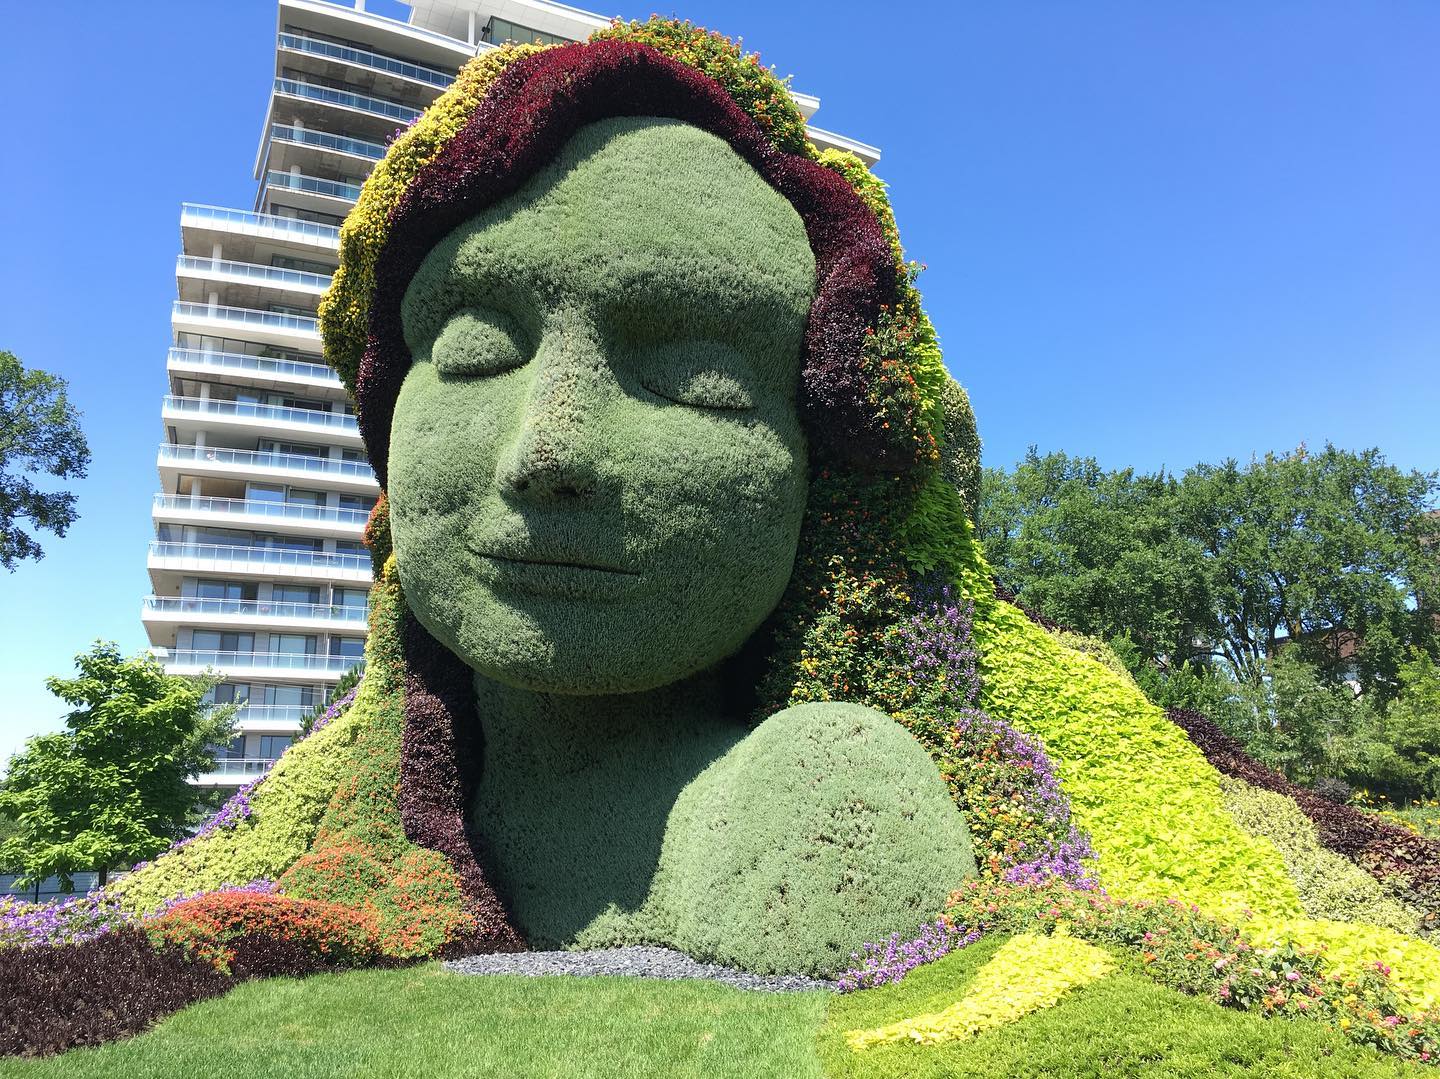 #travelgirl: Throwback to an other discovery I’ve had the chance to see with my own eyes. This garden in Gatineau/ Ottawa was created for the Canada Day 150th celebrations the most impressive free horticulture event called MosaiCanada150 #mosaicanada150 #botanicalart #garden #plants #art #exhibition #ottawa #gatineau